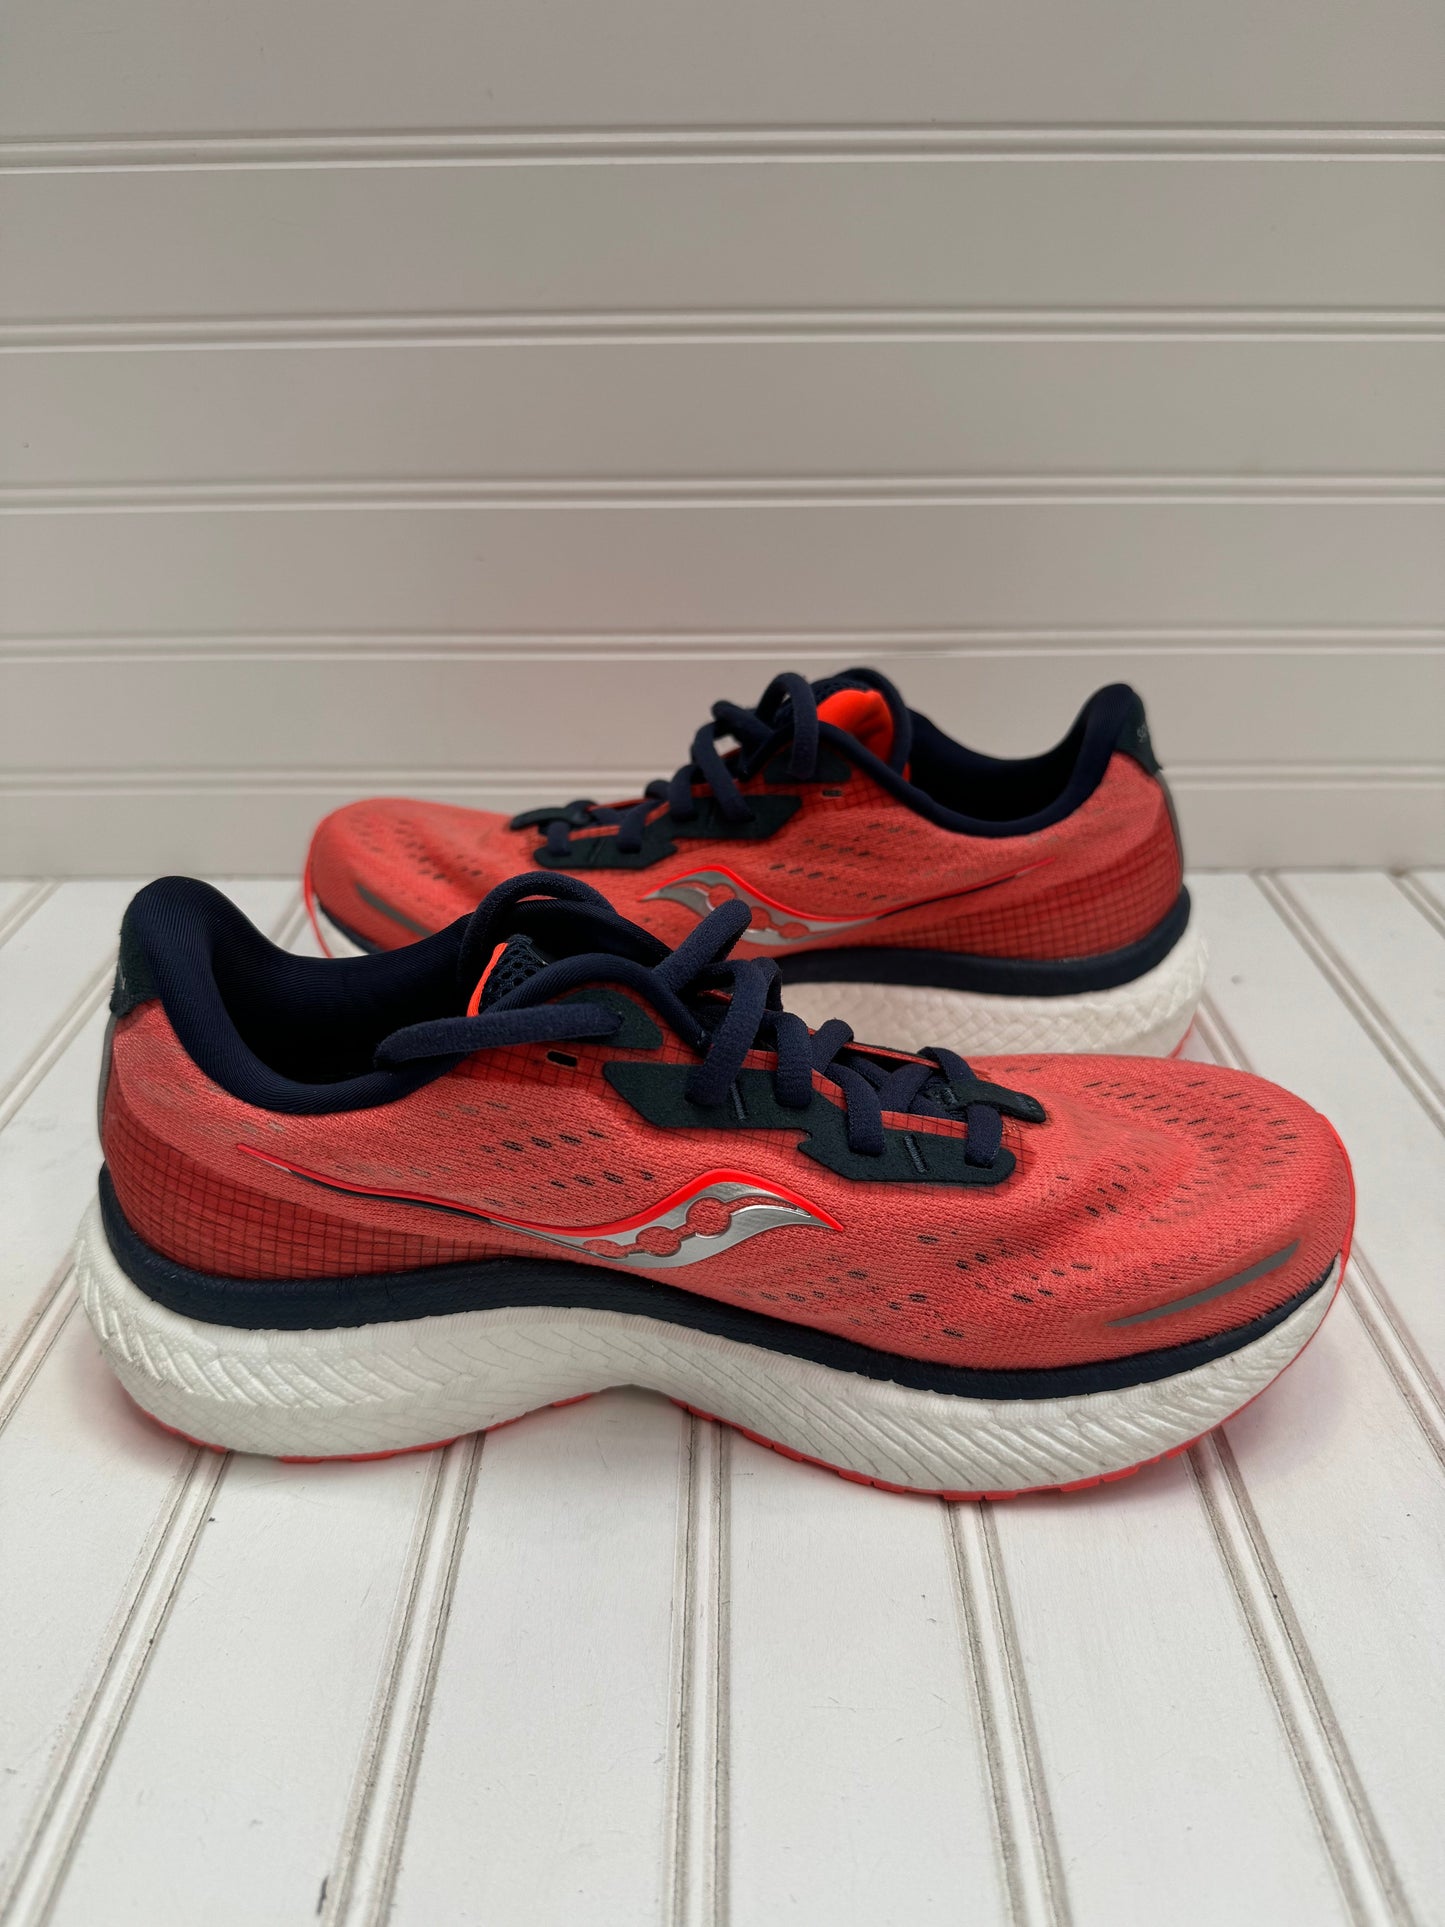 Multi-colored Shoes Athletic Saucony, Size 7